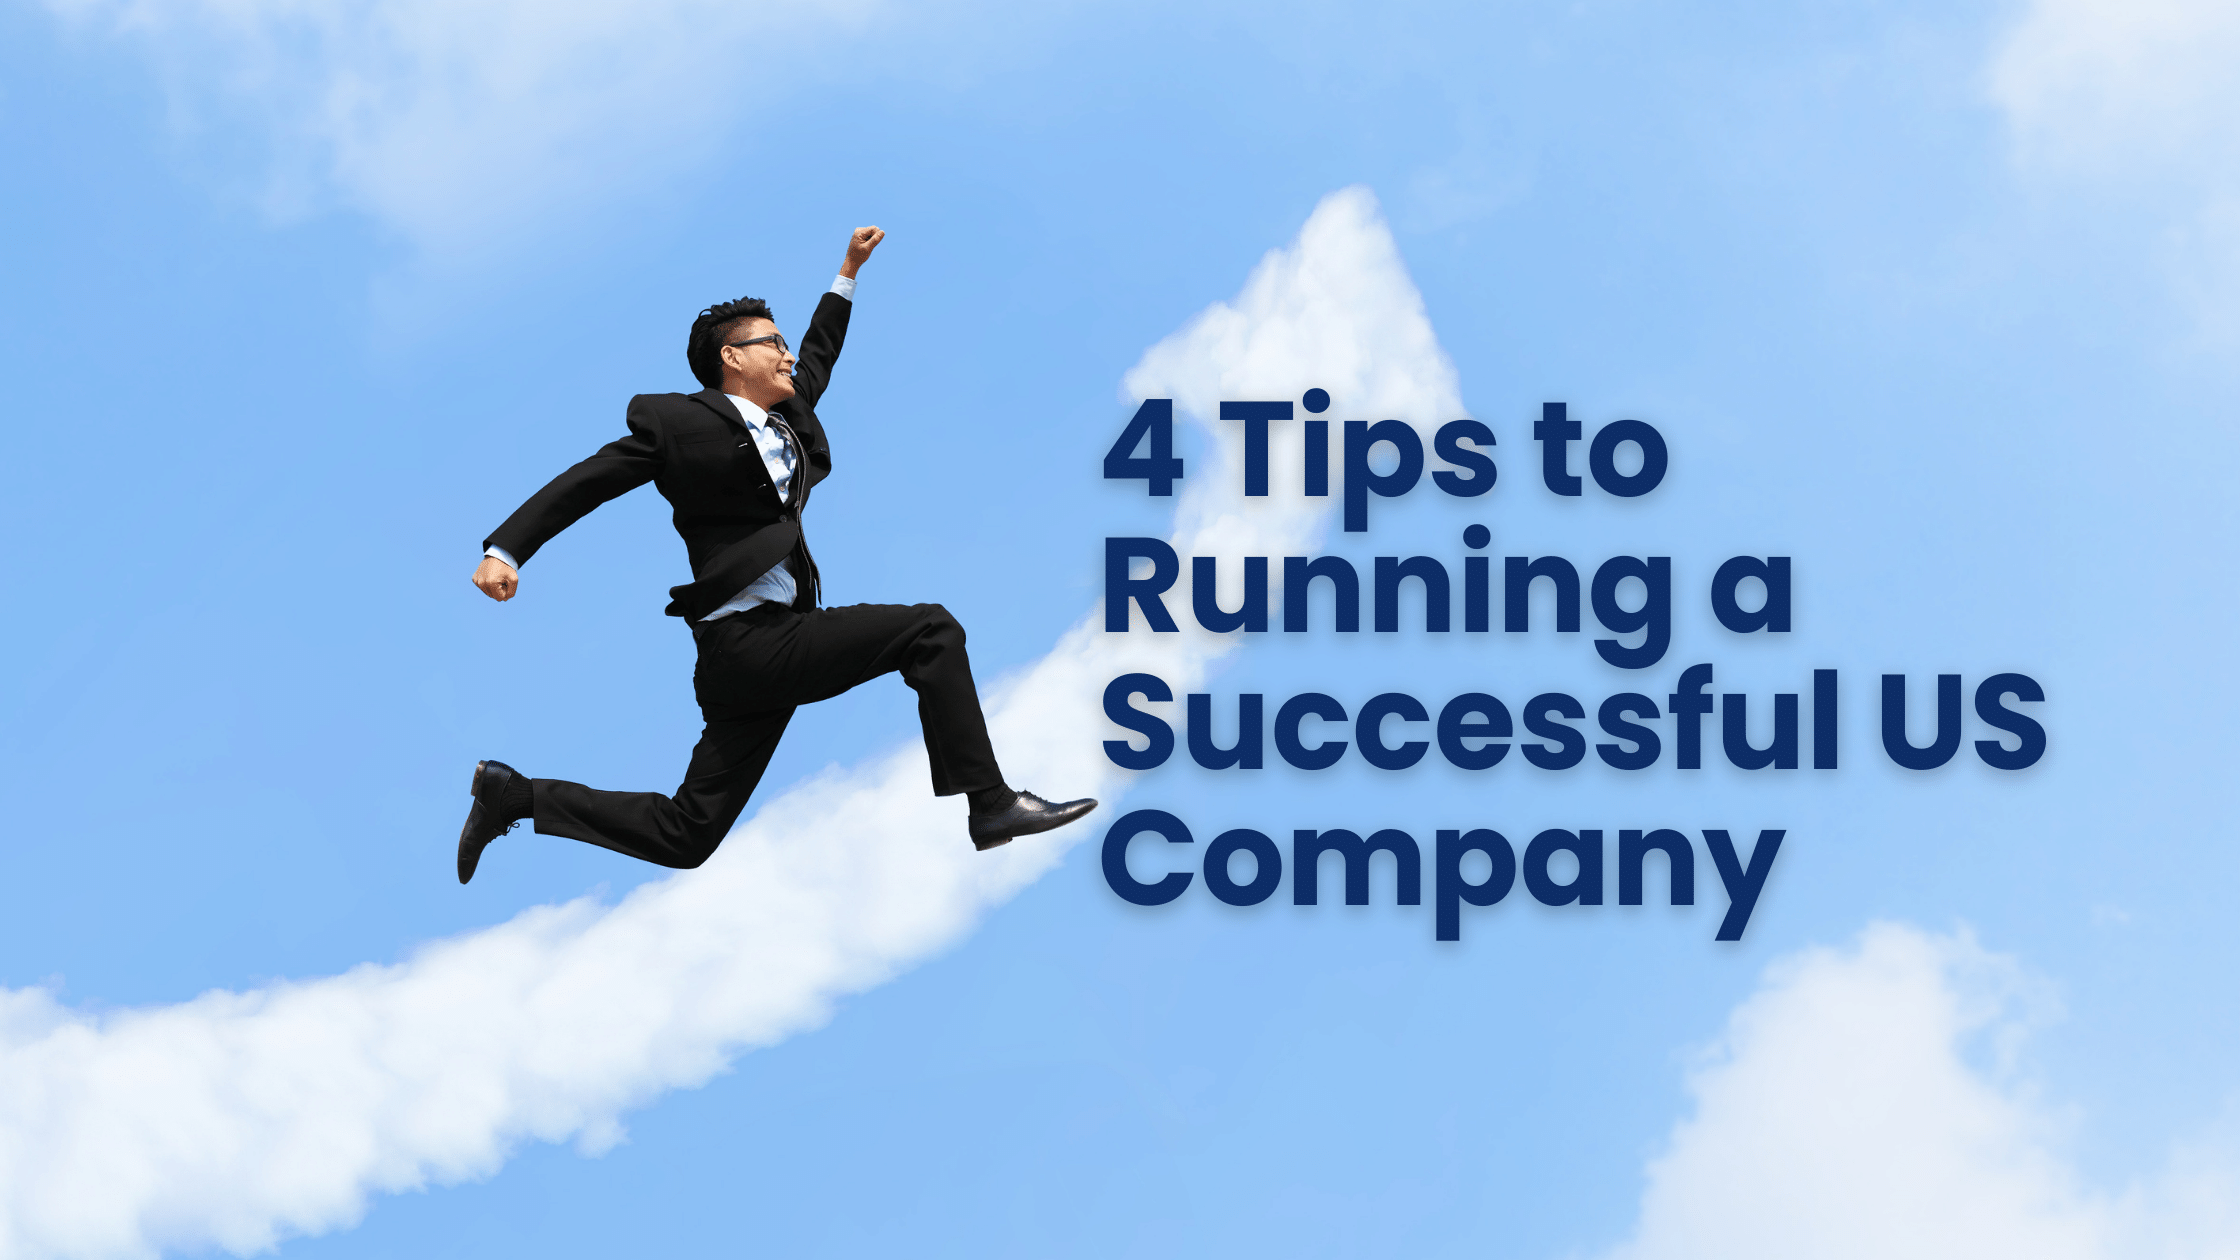 4 Tips to Running a Successful US Company